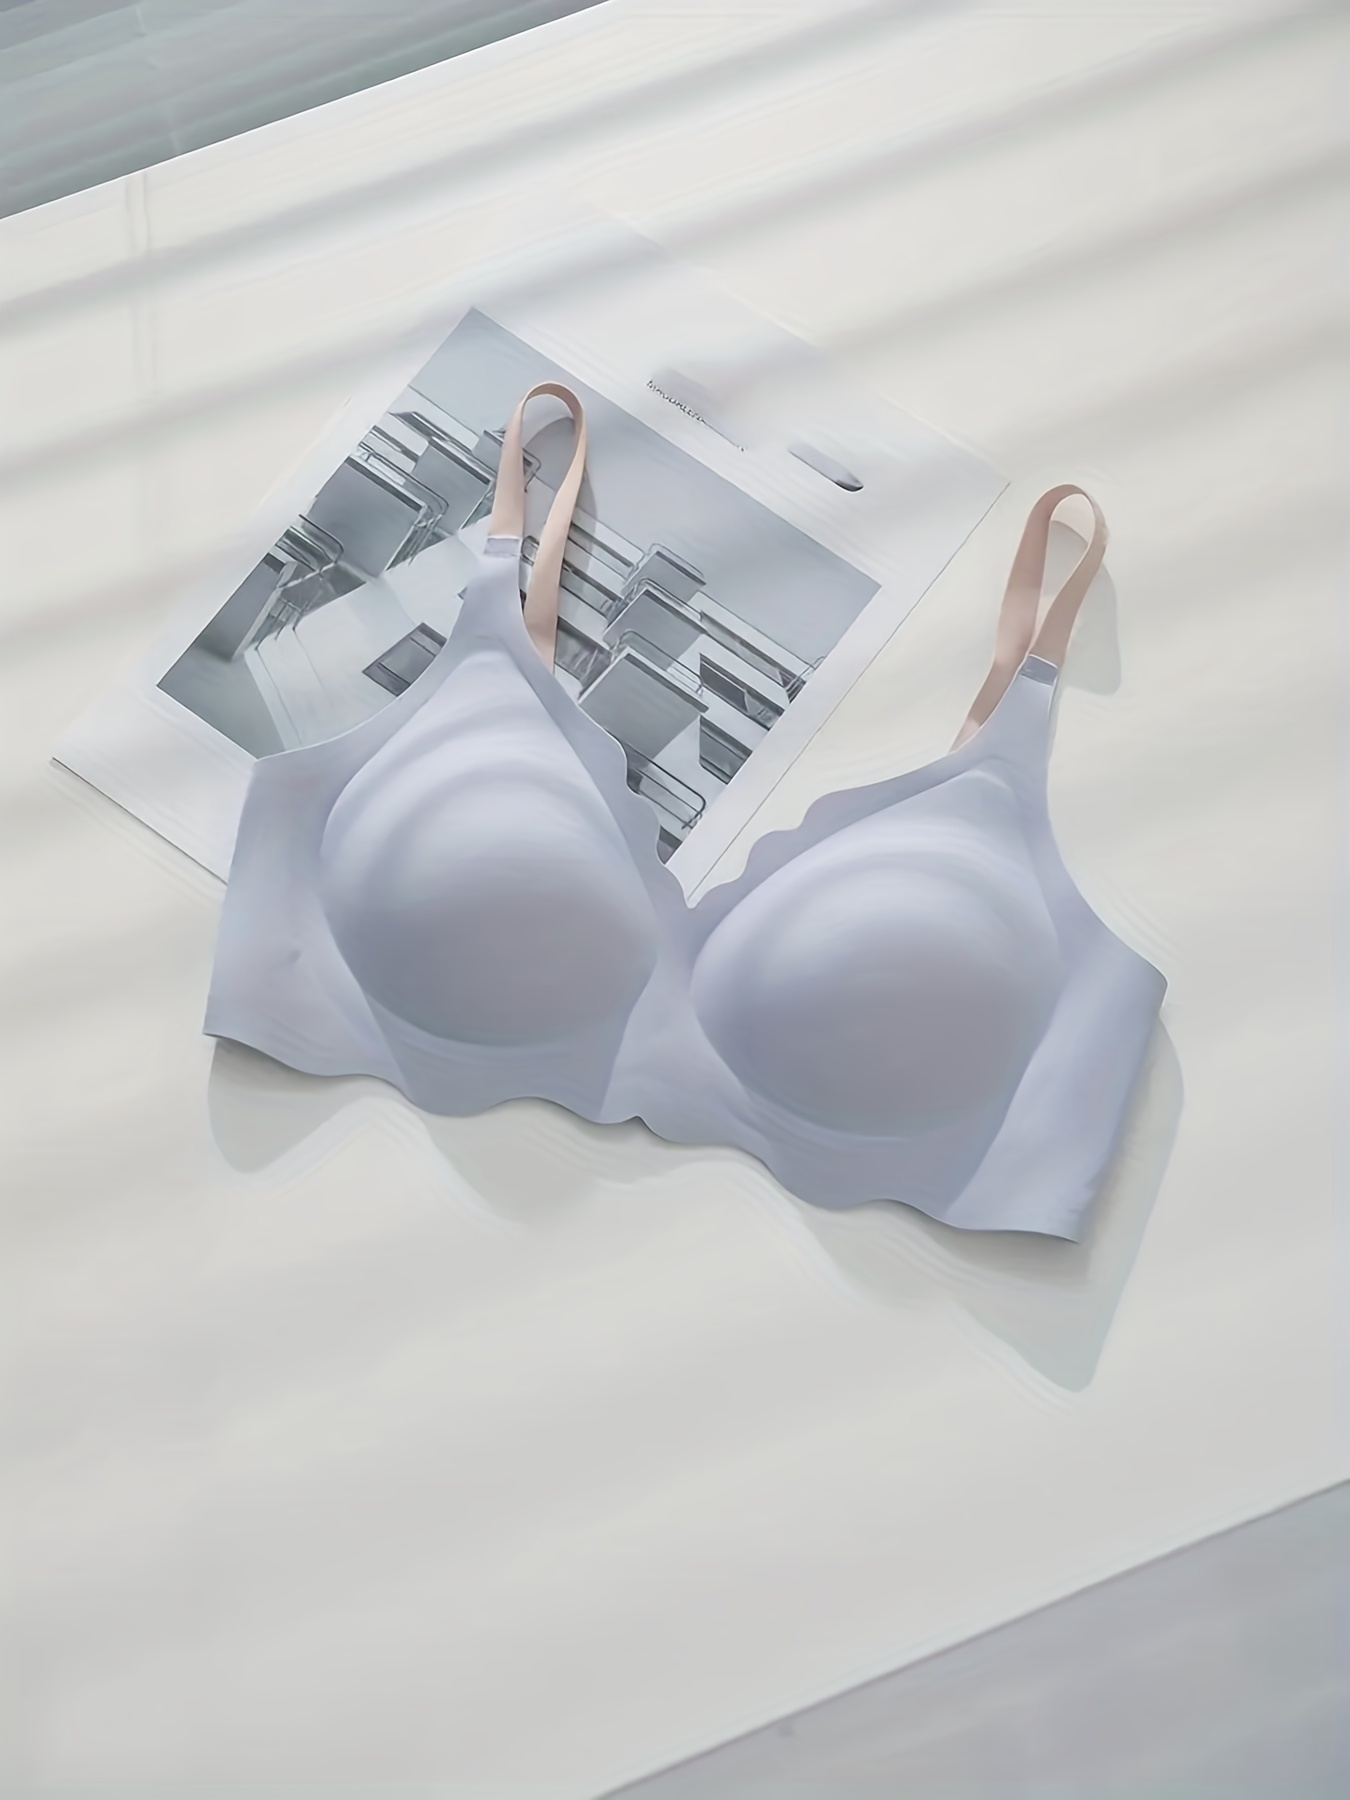 3-Pack: Seamless Miracle Bras with Removable Pads - Assorted Color Sets -  Coupon Codes, Promo Codes, Daily Deals, Save Money Today